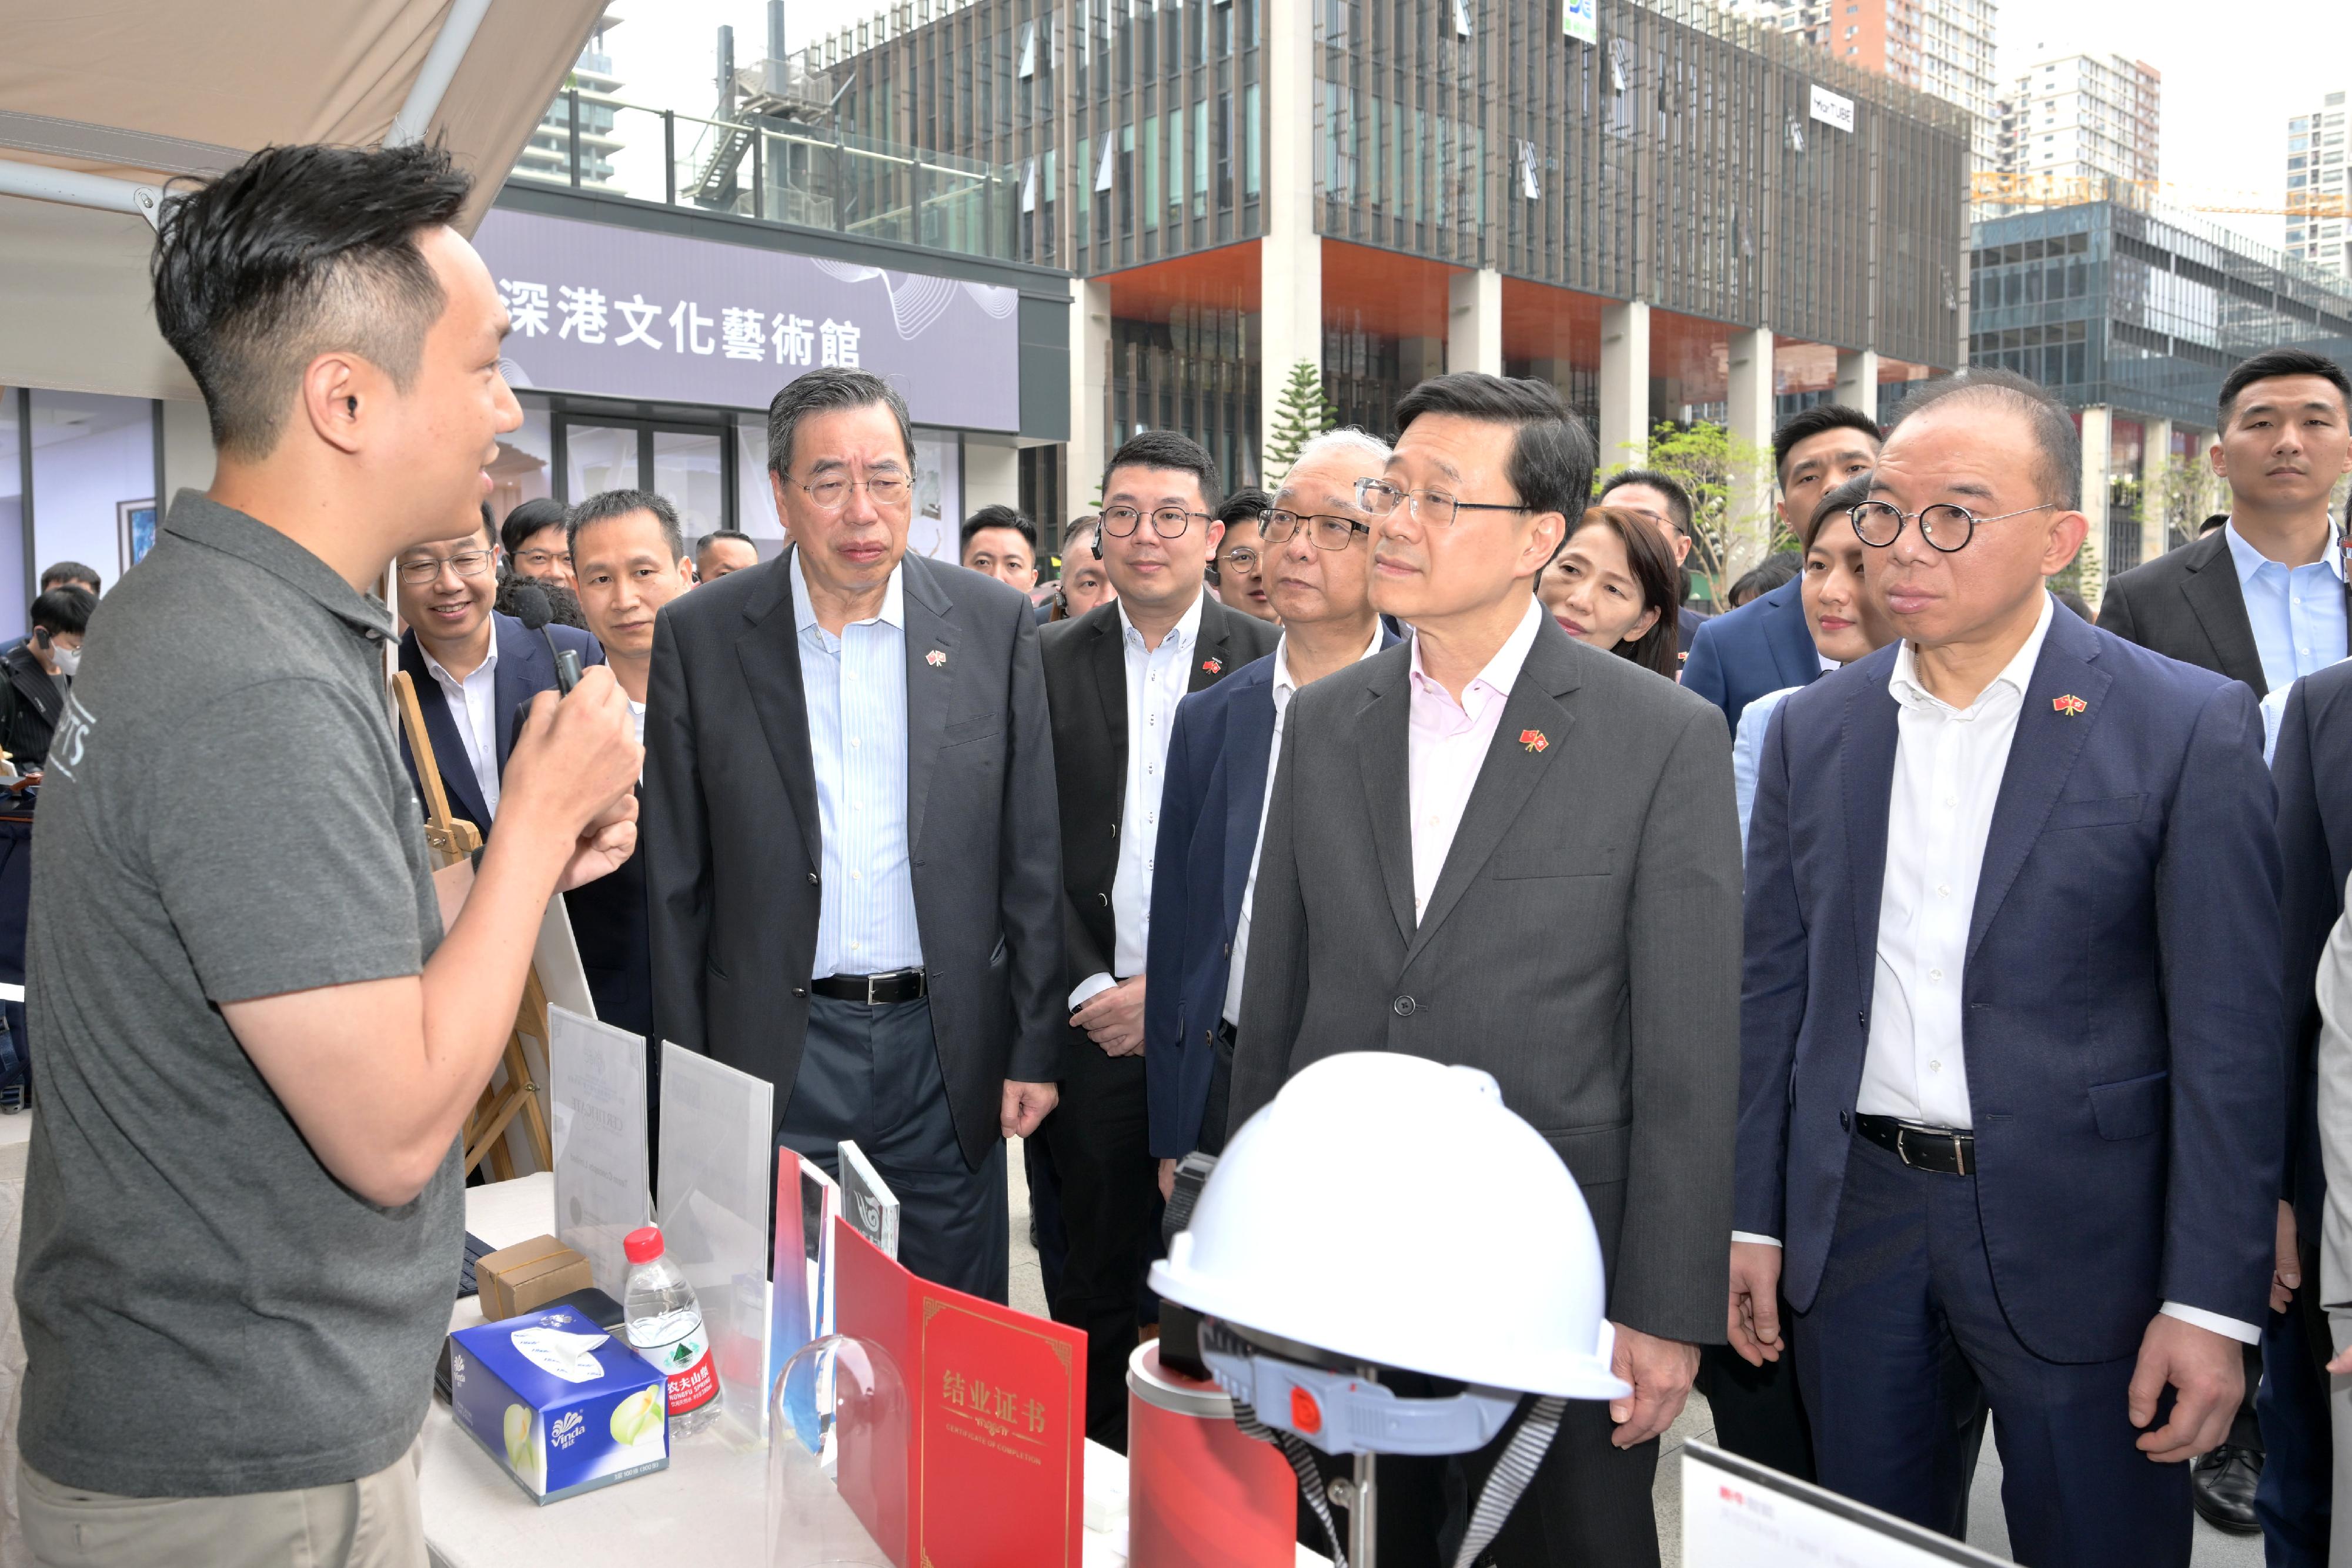 The Chief Executive, Mr John Lee, led a delegation of the Hong Kong Special Administrative Region Government and the Legislative Council (LegCo) to visit Shenzhen today (April 22). Photo shows Mr Lee (second right); the President of the LegCo, Mr Andrew Leung (fifth right); the Secretary for Constitutional and Mainland Affairs, Mr Erick Tsang Kwok-wai (first right); and the Secretary for Environment and Ecology, Mr Tse Chin-wan (third right), exchanging views with the Hong Kong youth entrepreneur at the Qiahai Shenzhen-Hong Kong Youth Innovation and Entrepreneur Hub.